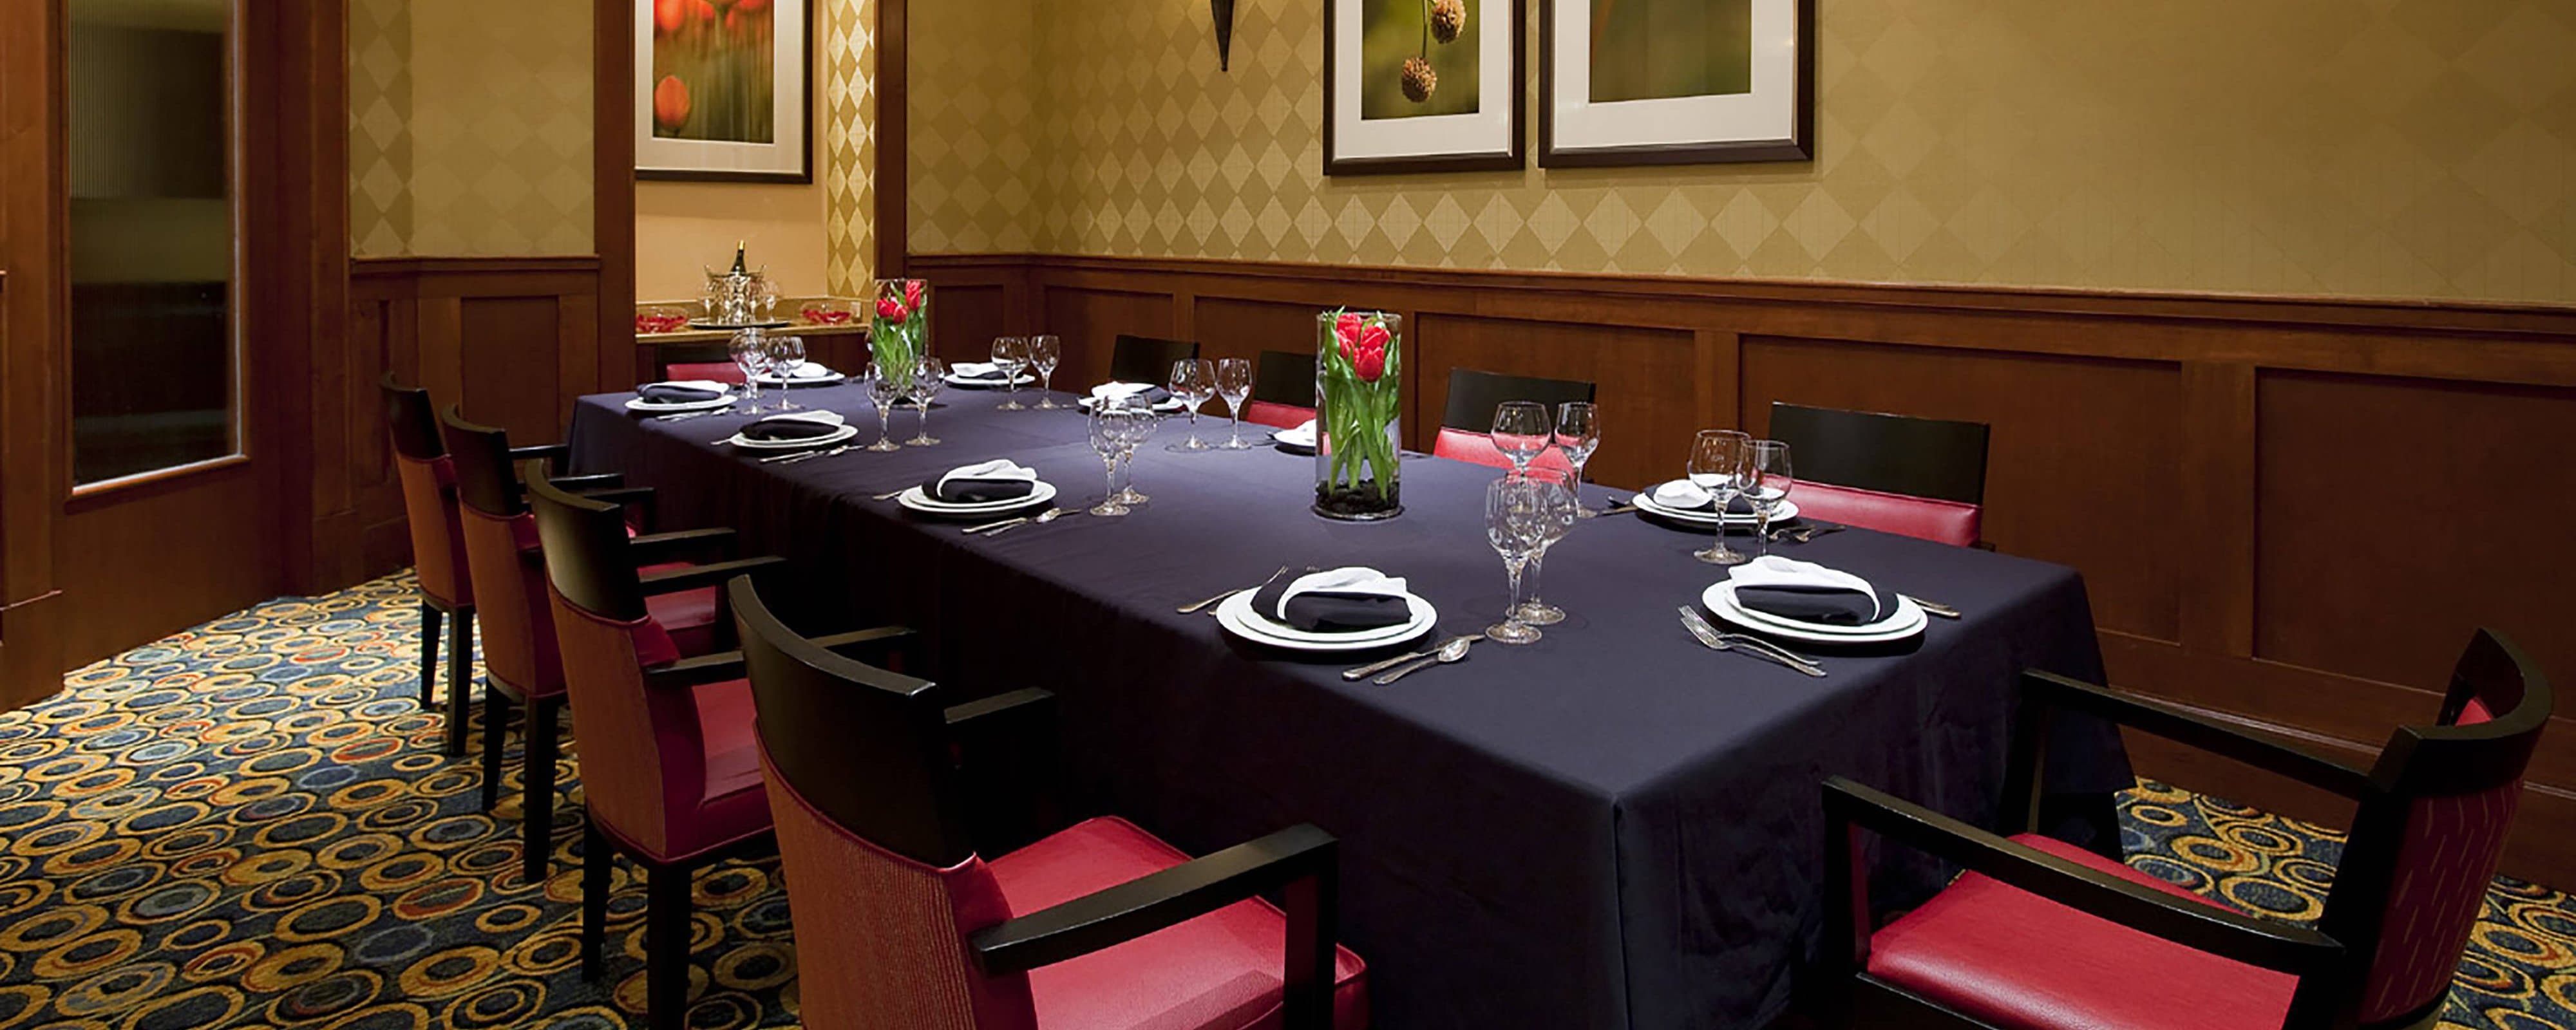 Austin Marriott South, Austin Restaurants With Private Dining Rooms